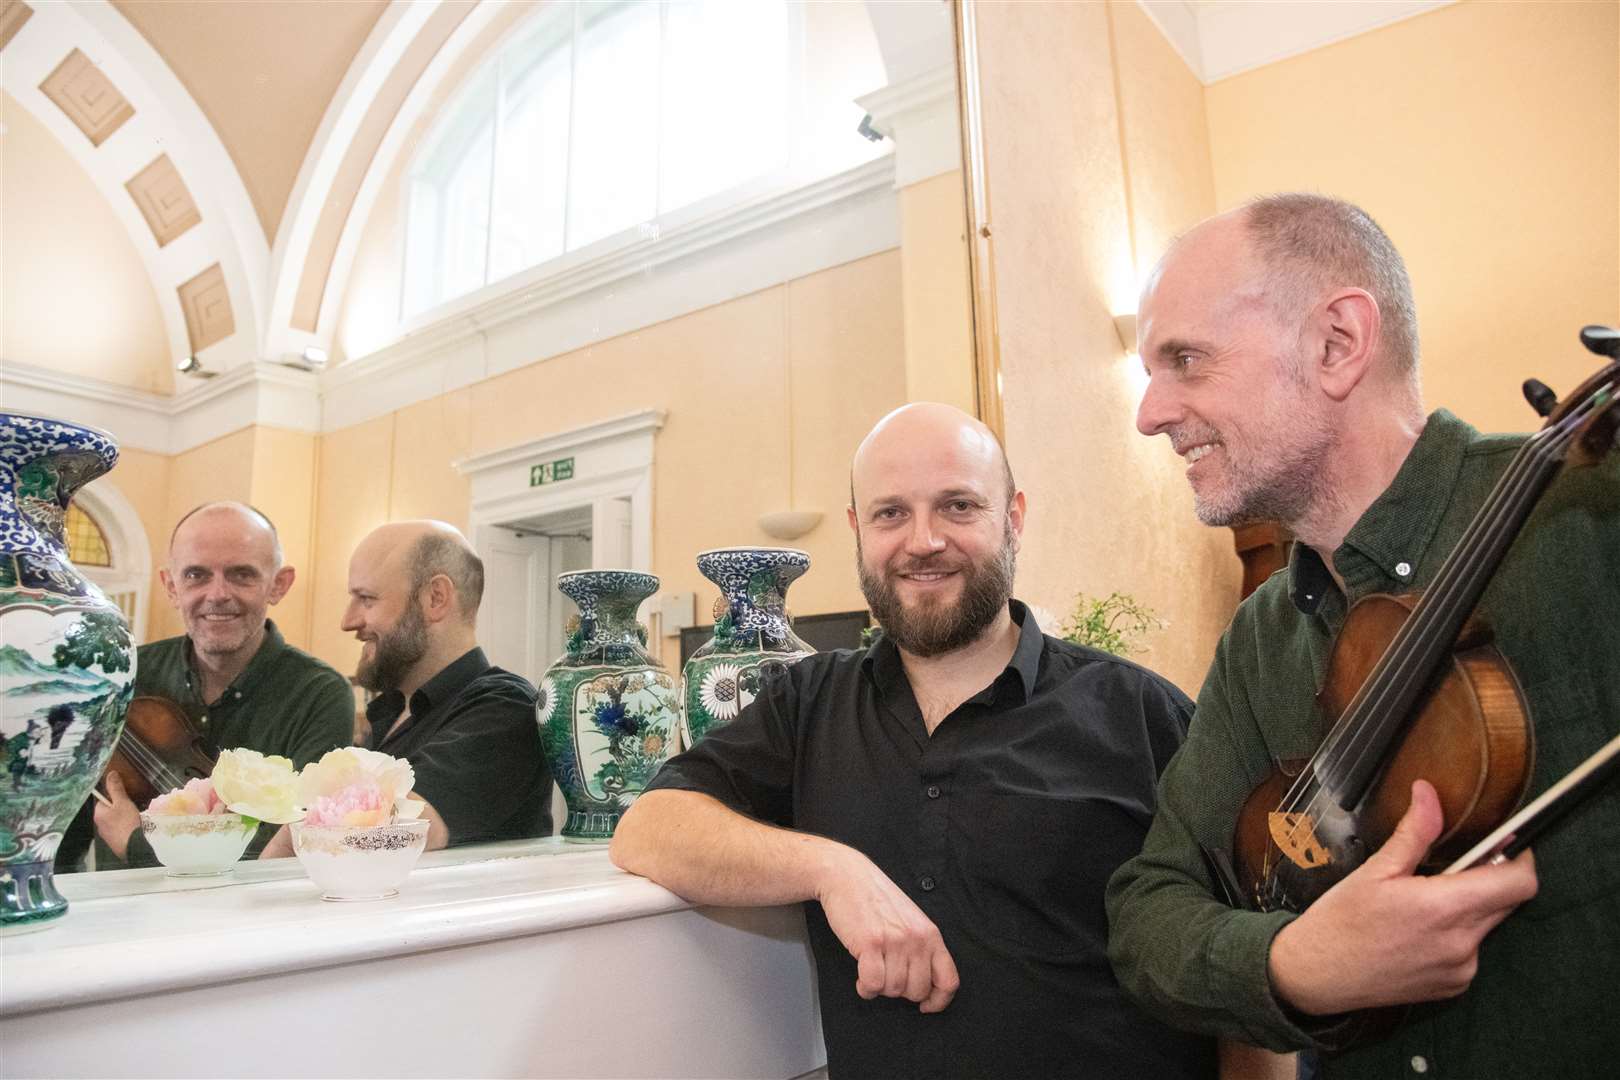 Hamish Napier (left) and Duncan Chisholm reflect on being part of the Remembering Together Moray project at Anderson's care home in Elgin. Picture: Daniel Forsyth